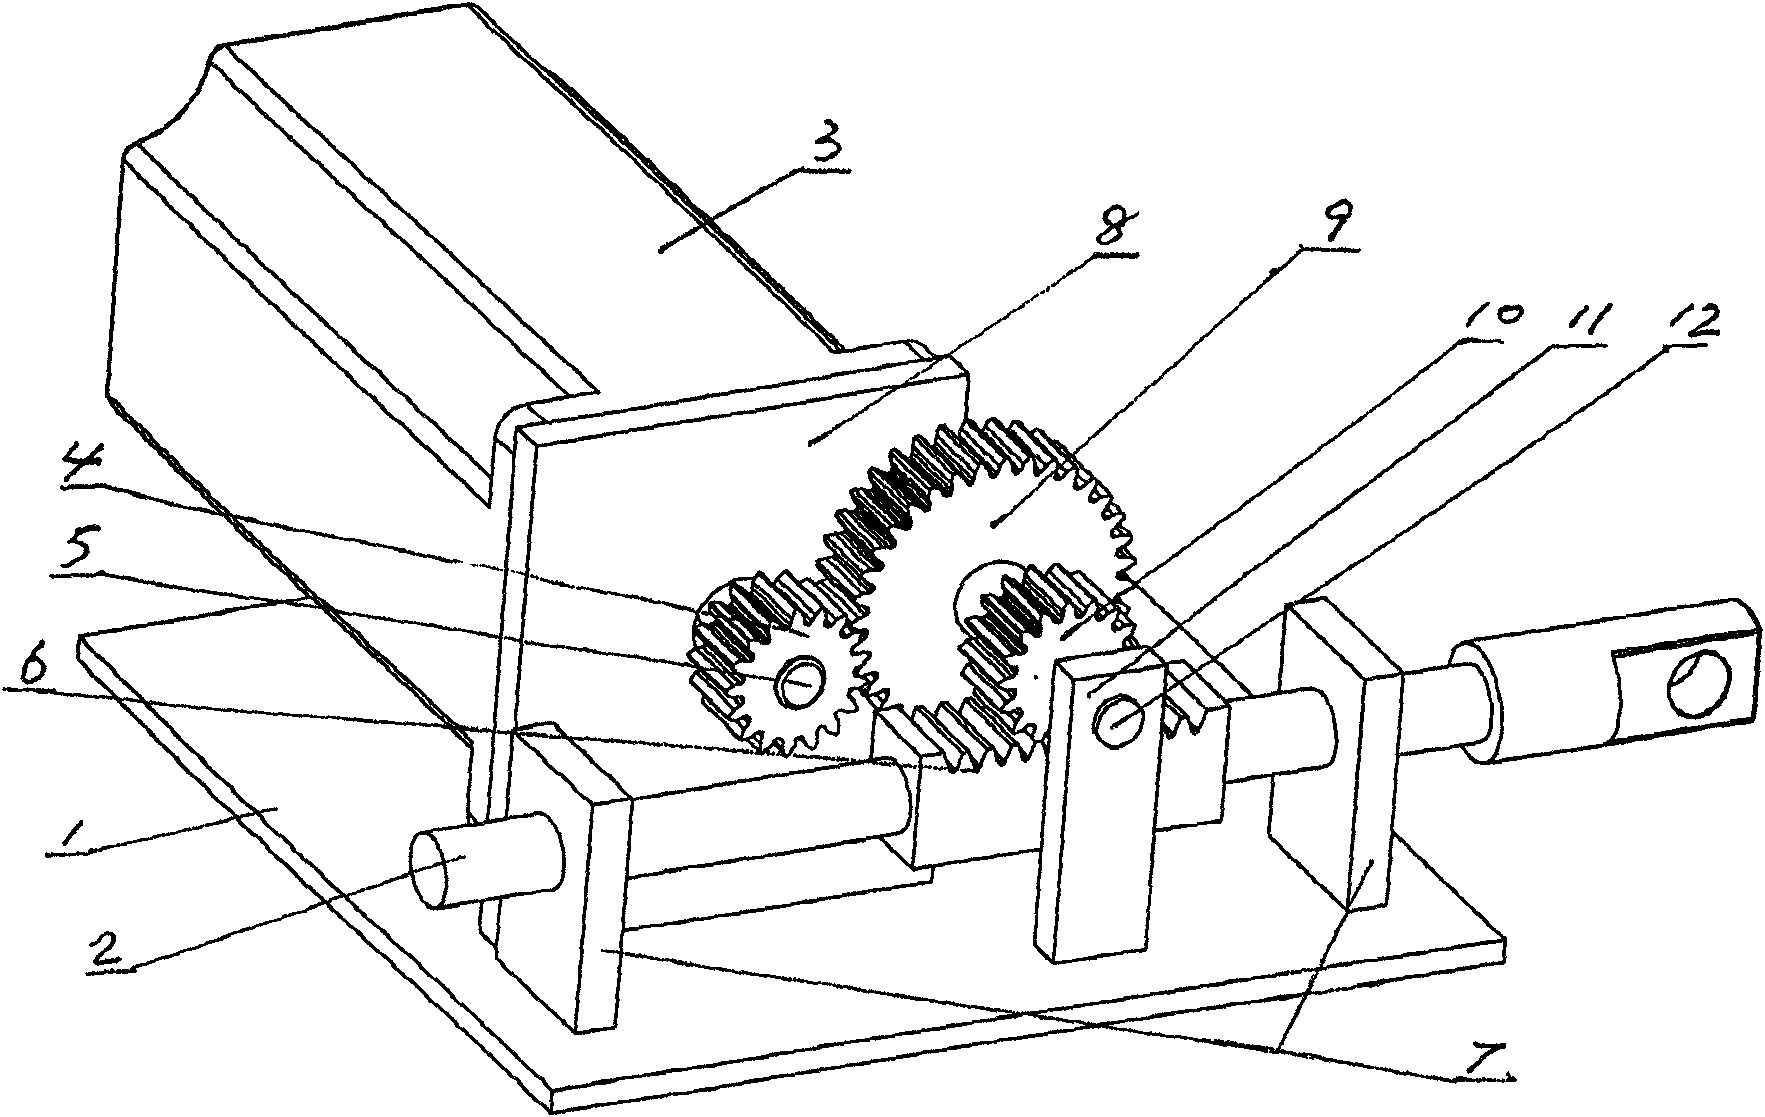 Electrical control drive device for hydraulic valve core